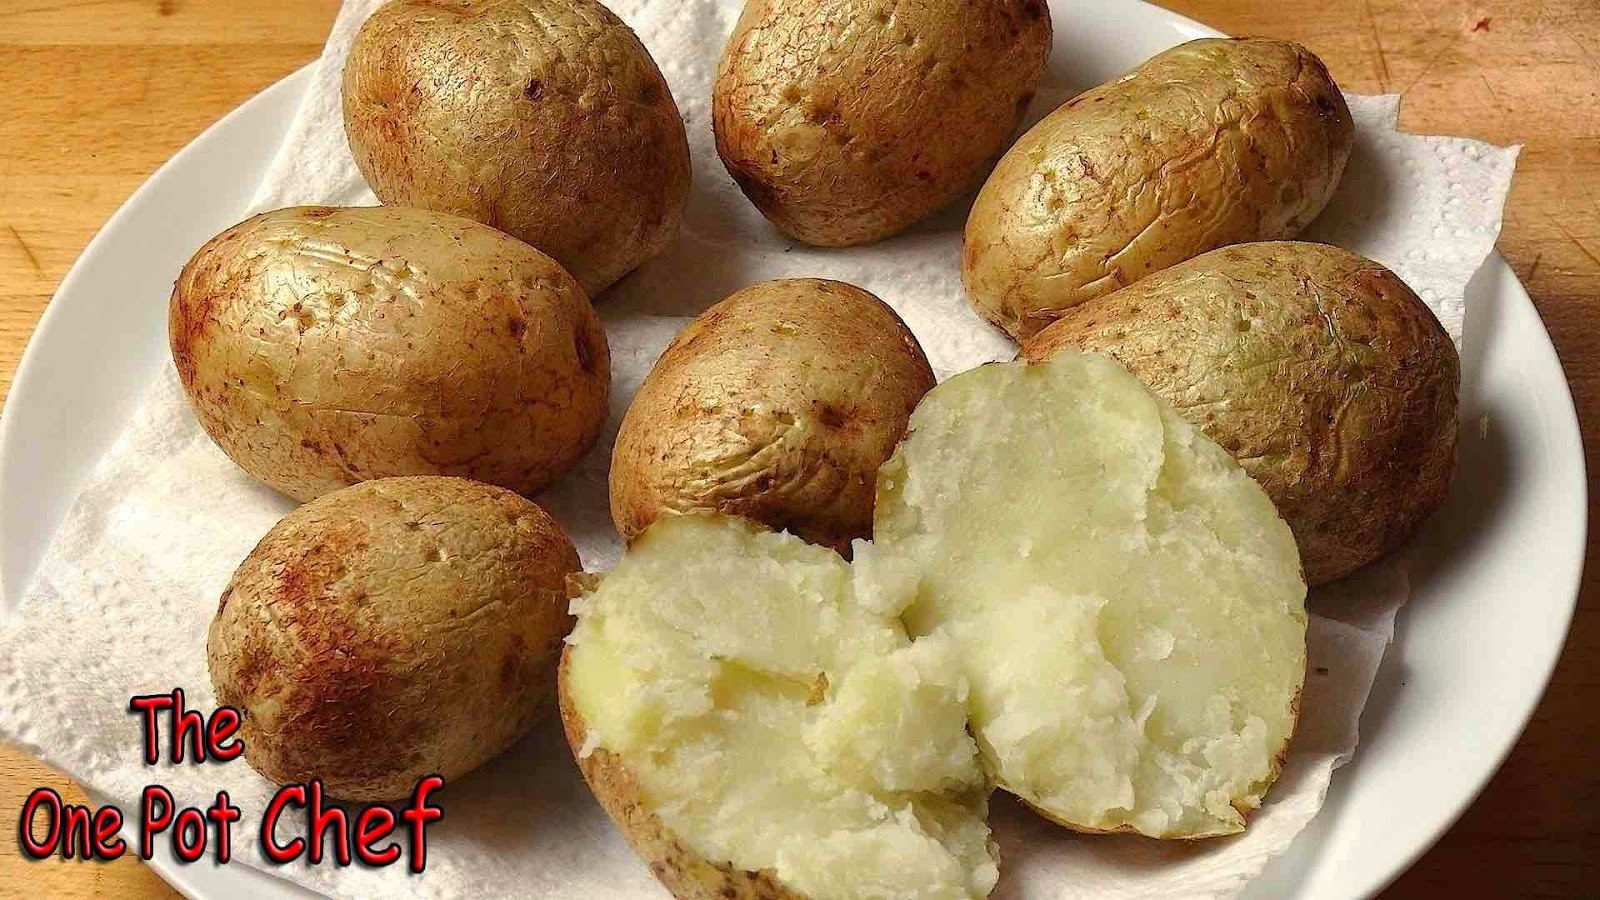 Bake Potato In Microwave
 The e Pot Chef Show Quick Tips Microwave Baked Potatoes